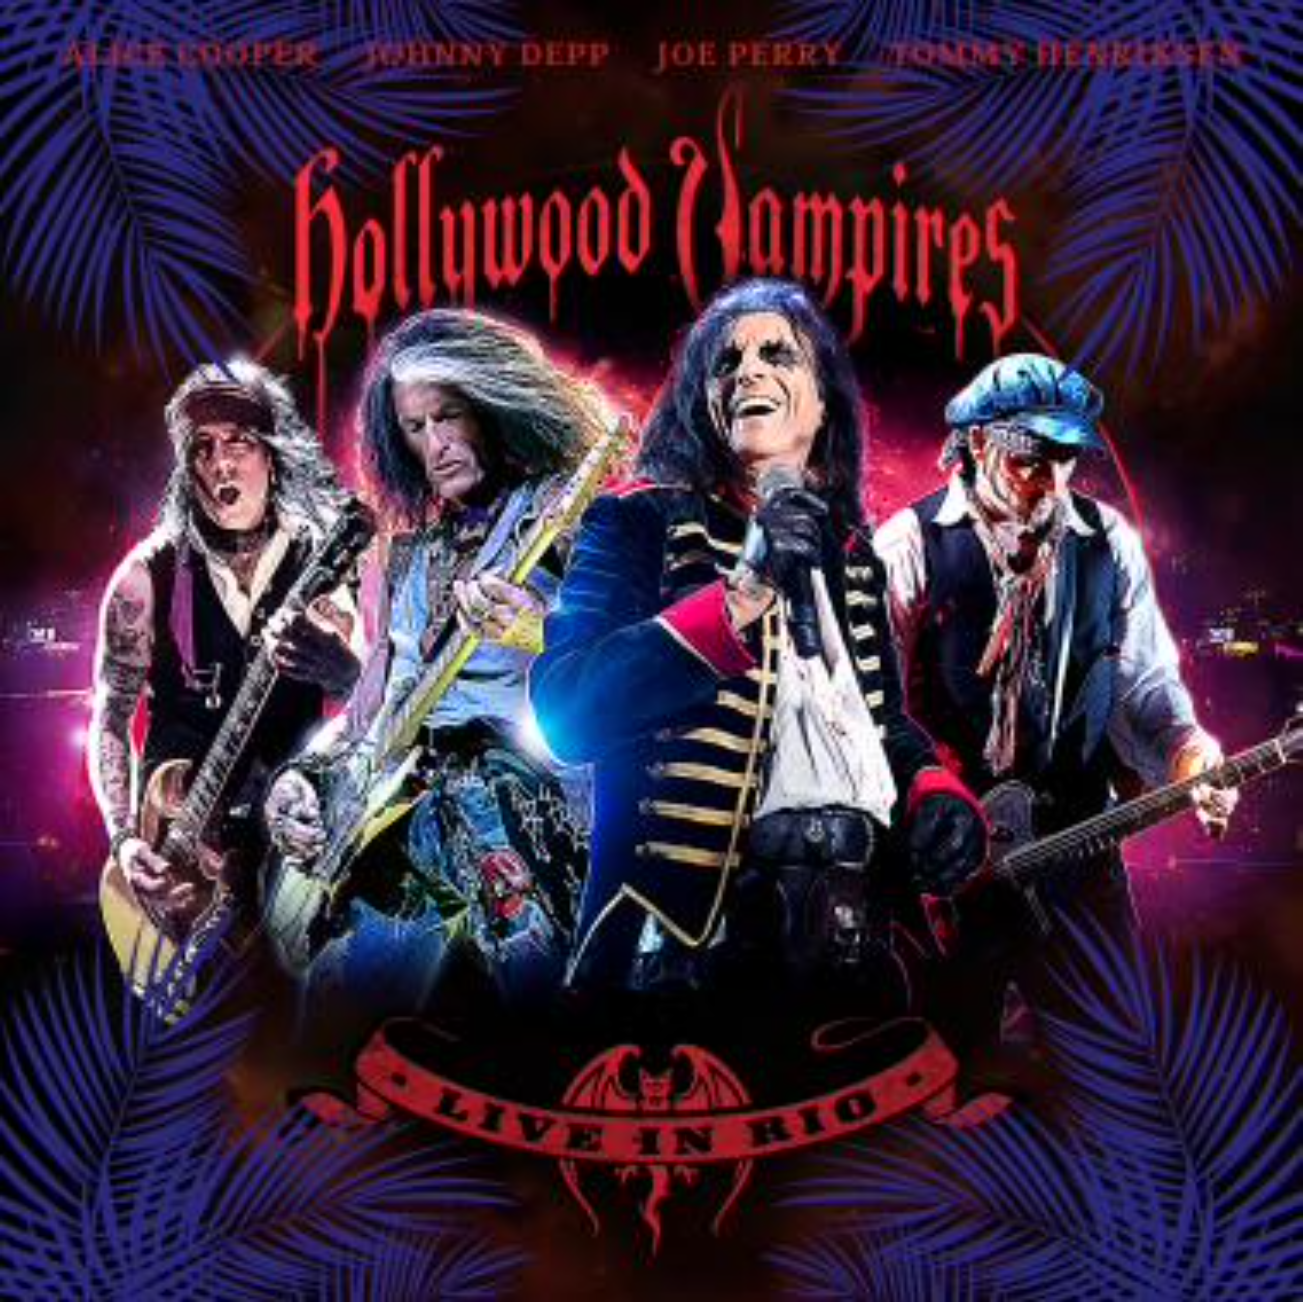 Hollywood Vampires Announce "Live In Rio" Album + Share "I Got A Line On You" Live Video